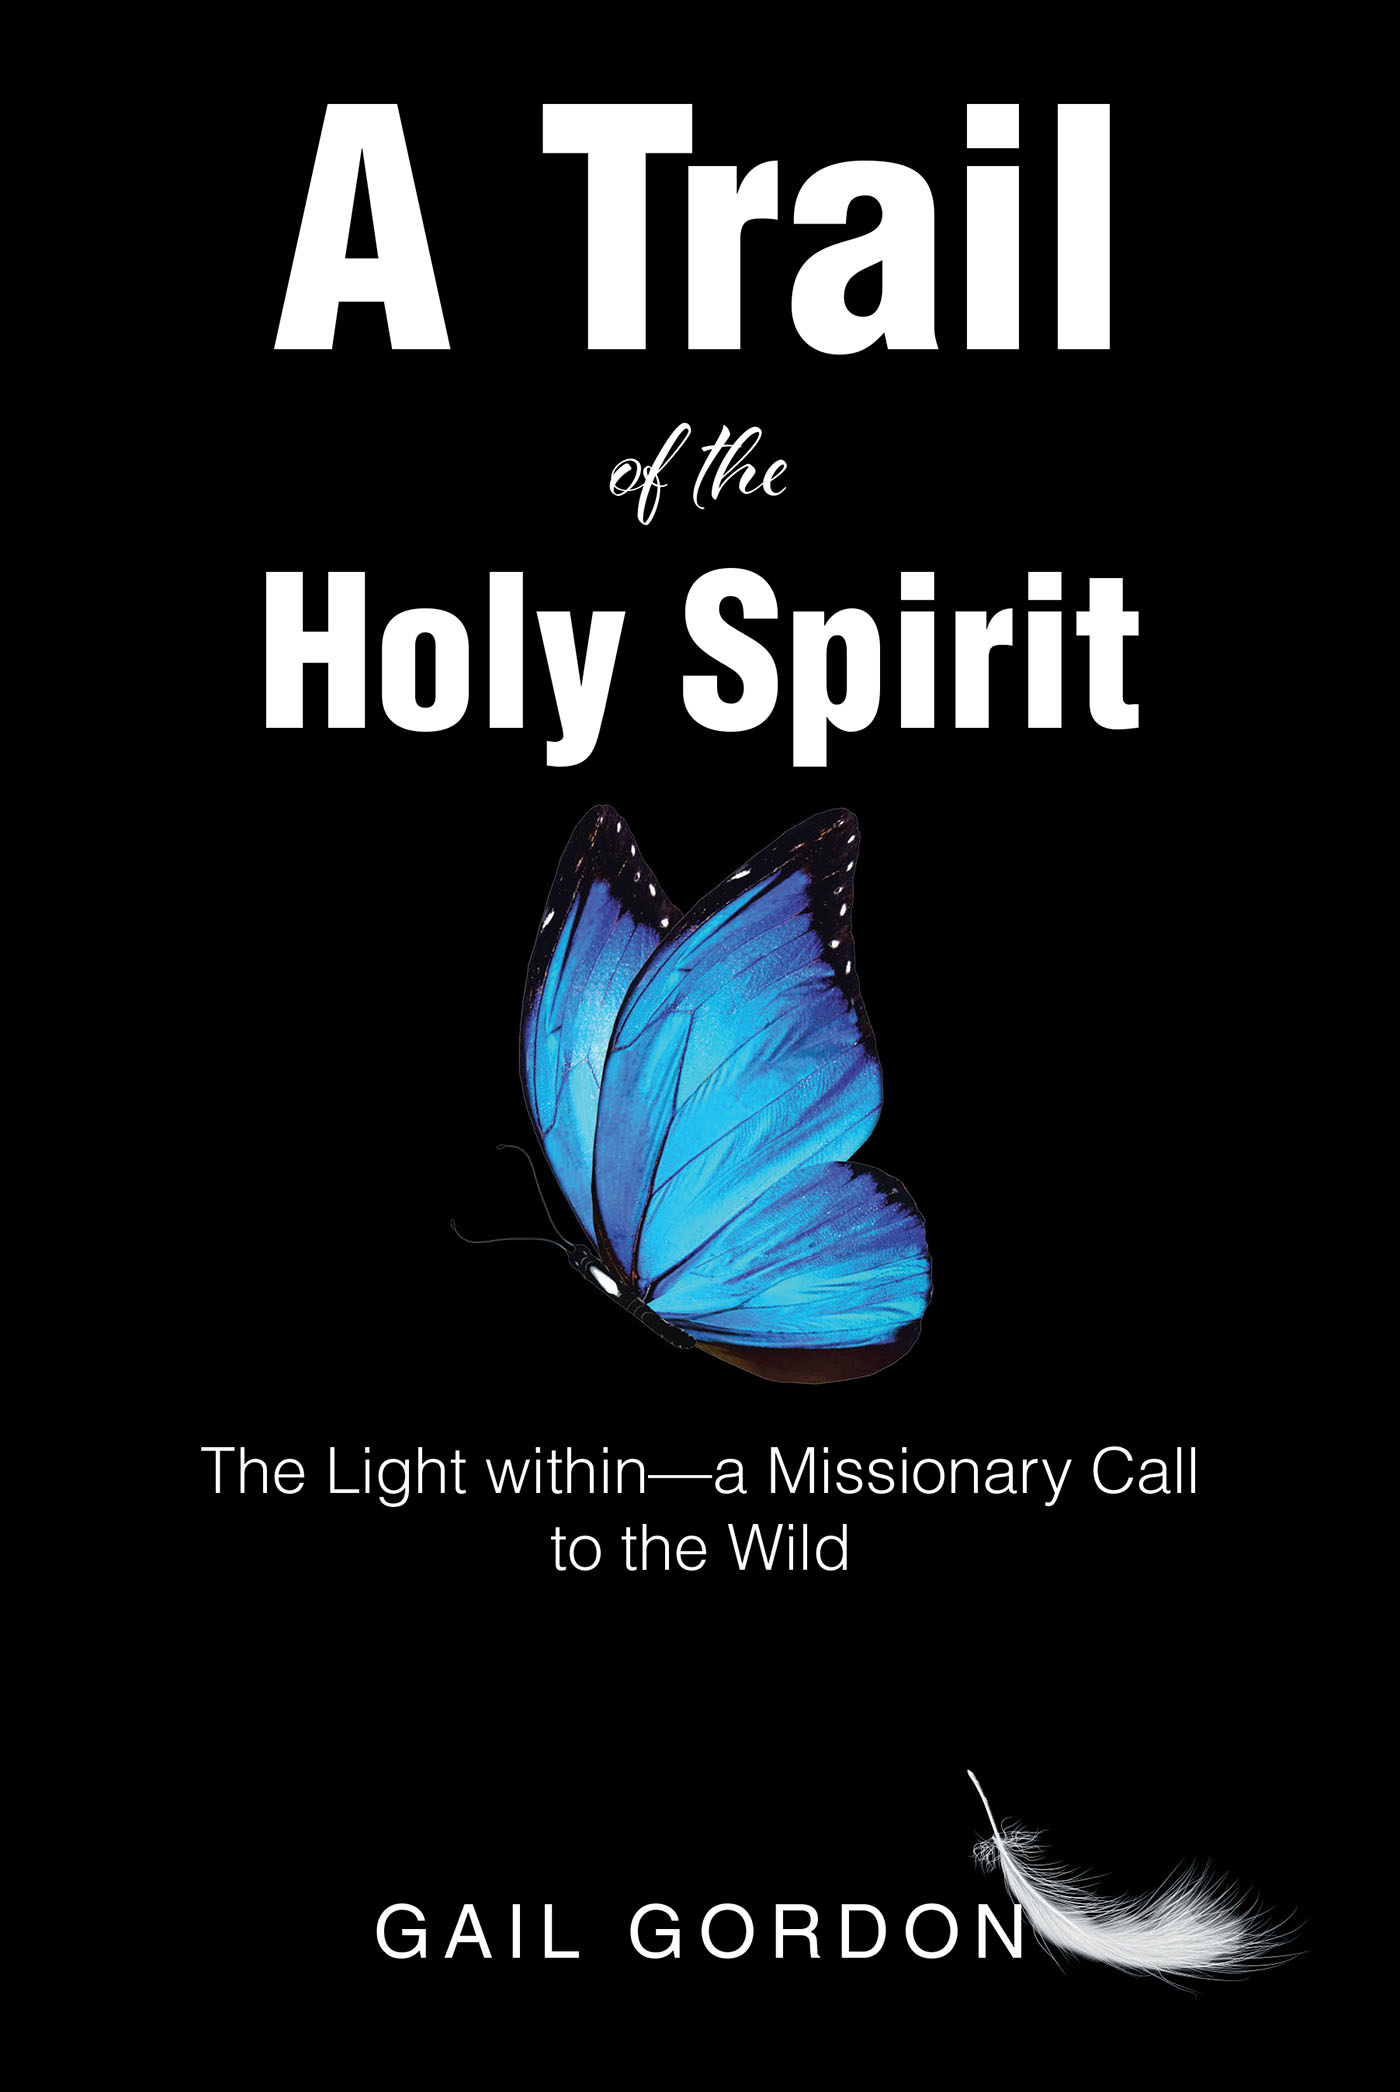 Gail Gordon’s Newly Released “A Trail of the Holy Spirit: The Light within—a Missionary Call to the Wild” is a Powerful Story of Purpose and Determination